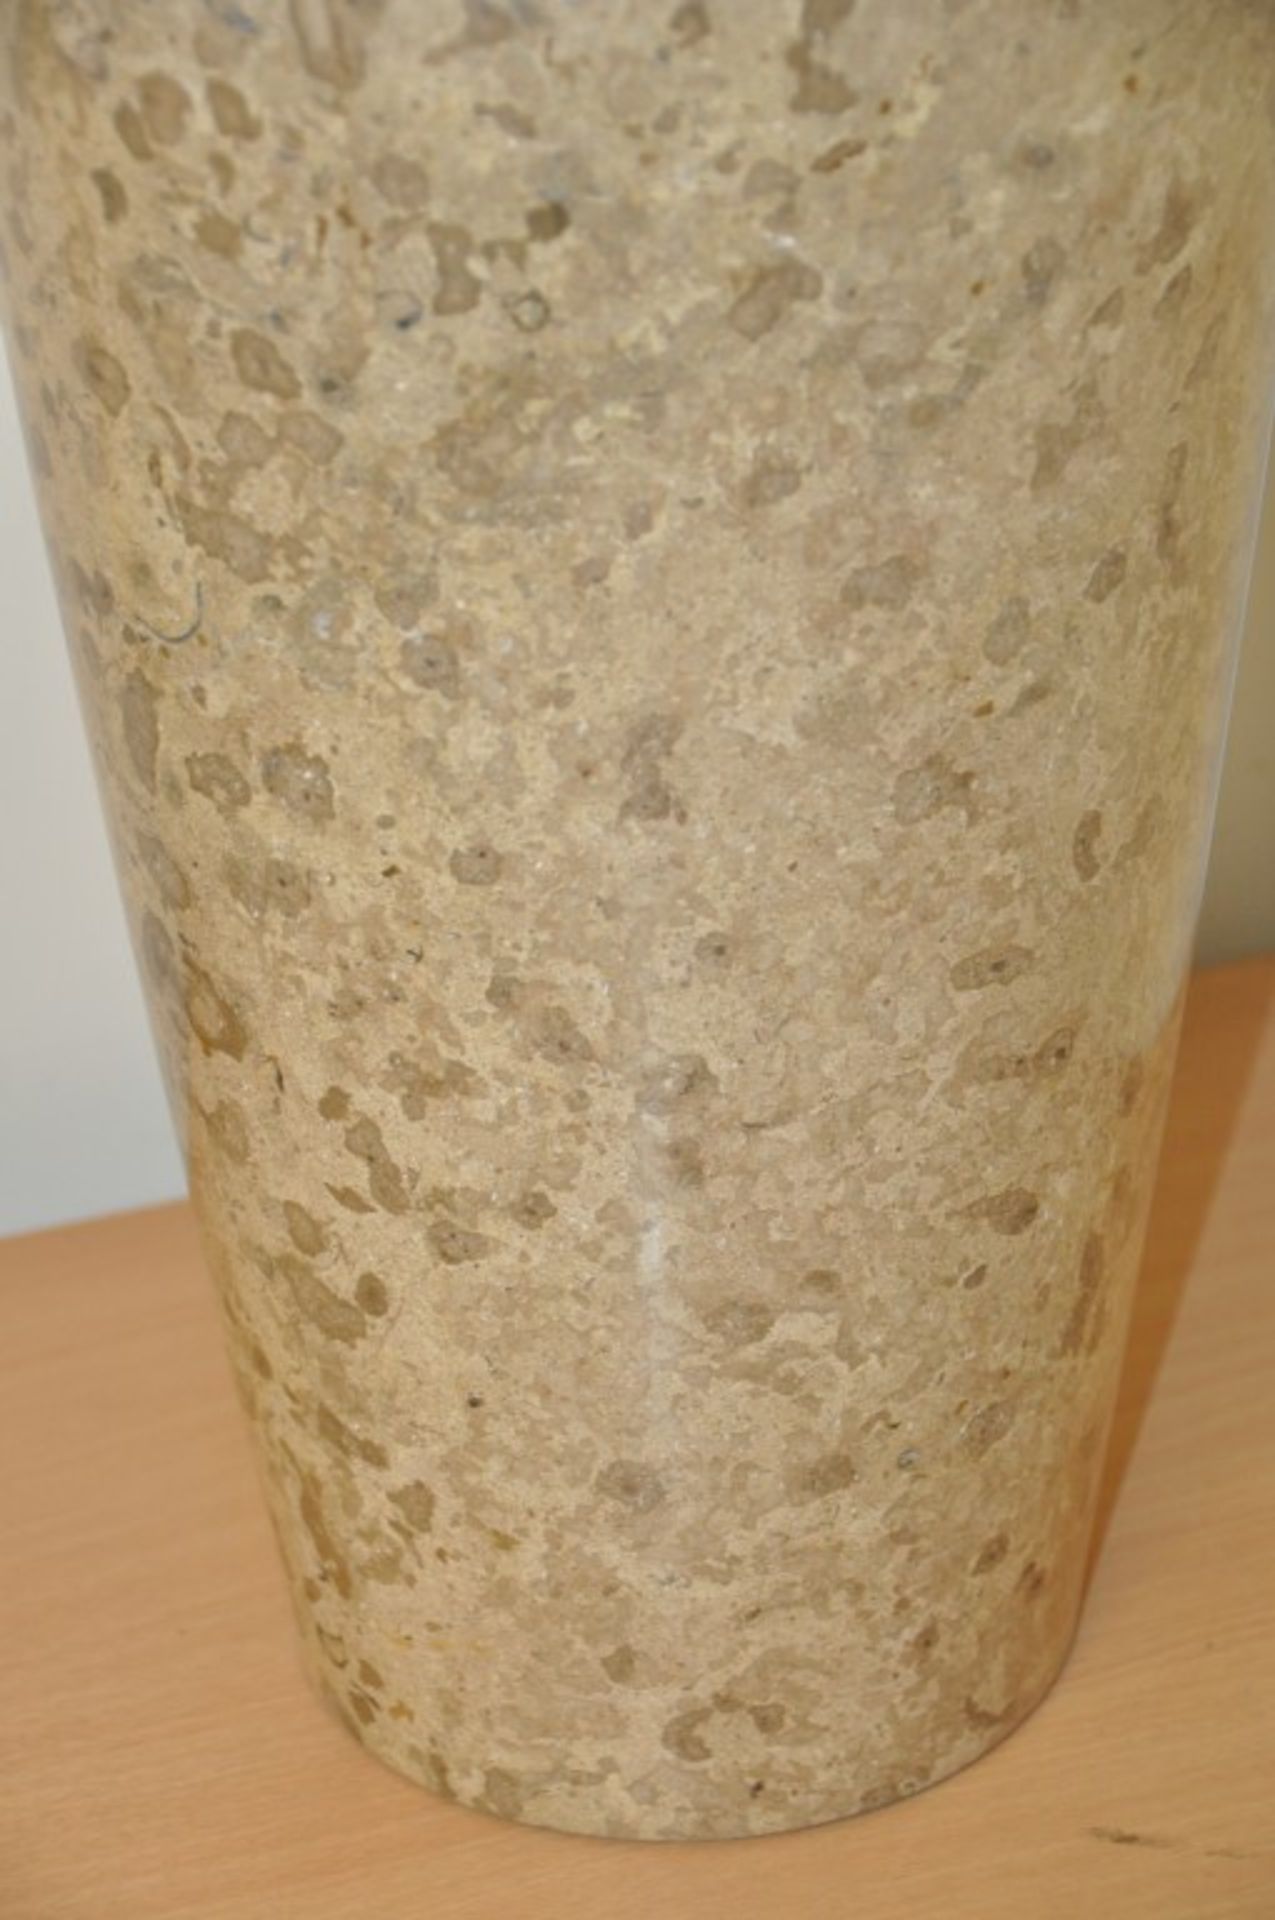 1 x Large Decorative Carved Natural Fossil Stone Vase - Gorgeous Glossy Marbled Finish - 3FT - Image 3 of 8